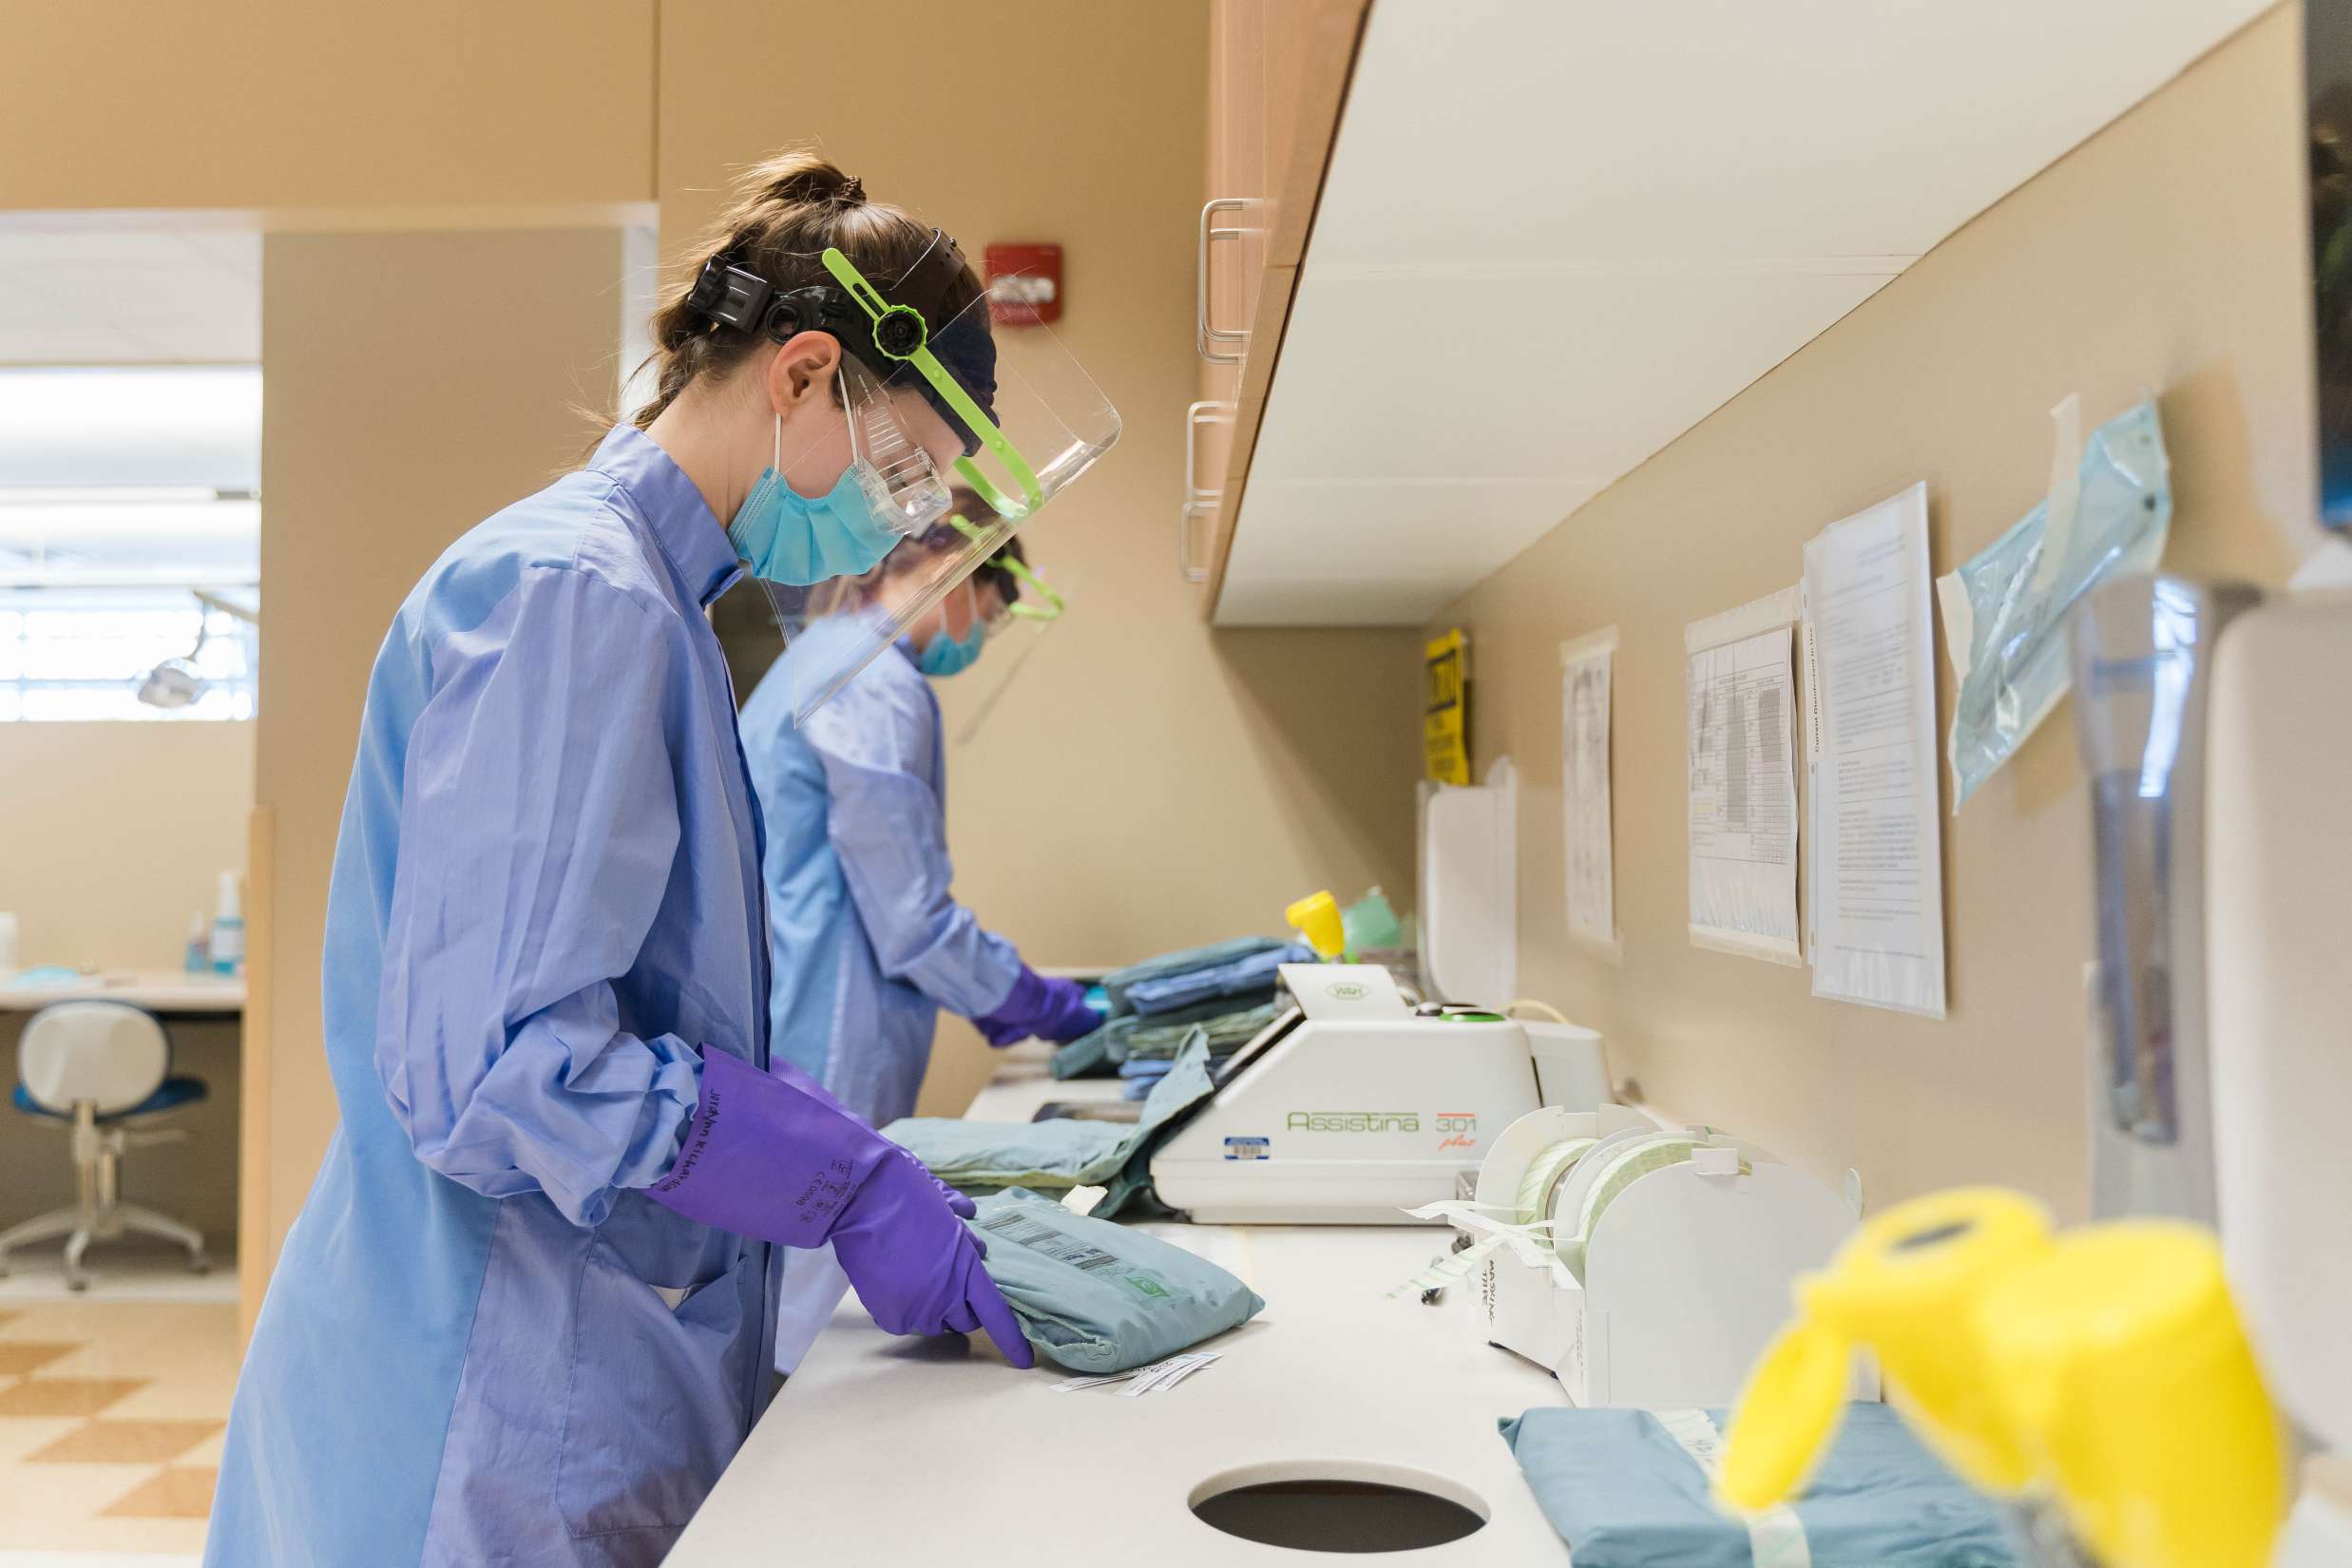 Two dental hygienists dressed in medical garbs wearing face shields working inside of a dental lab.